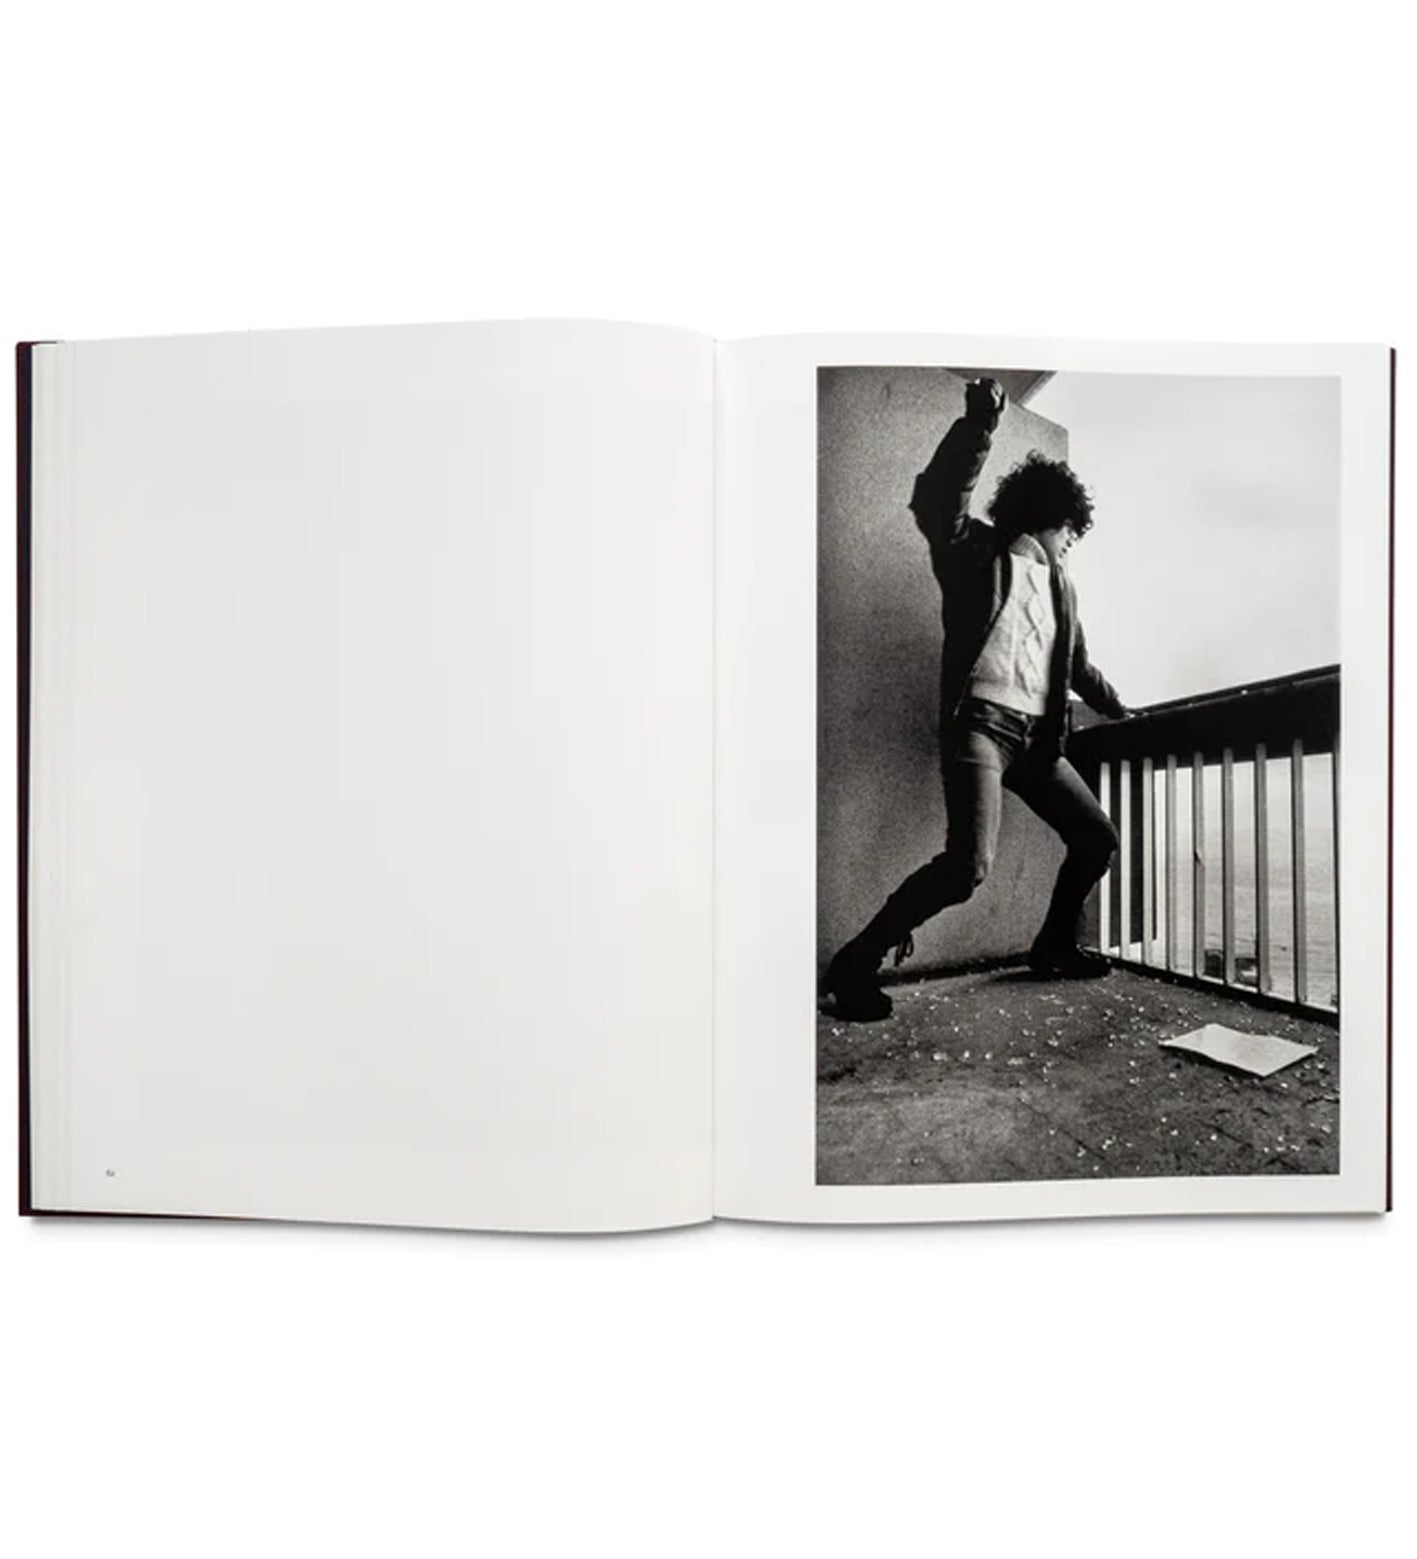 Don McCullin: Life, Death and Everything in Between Signed Edition